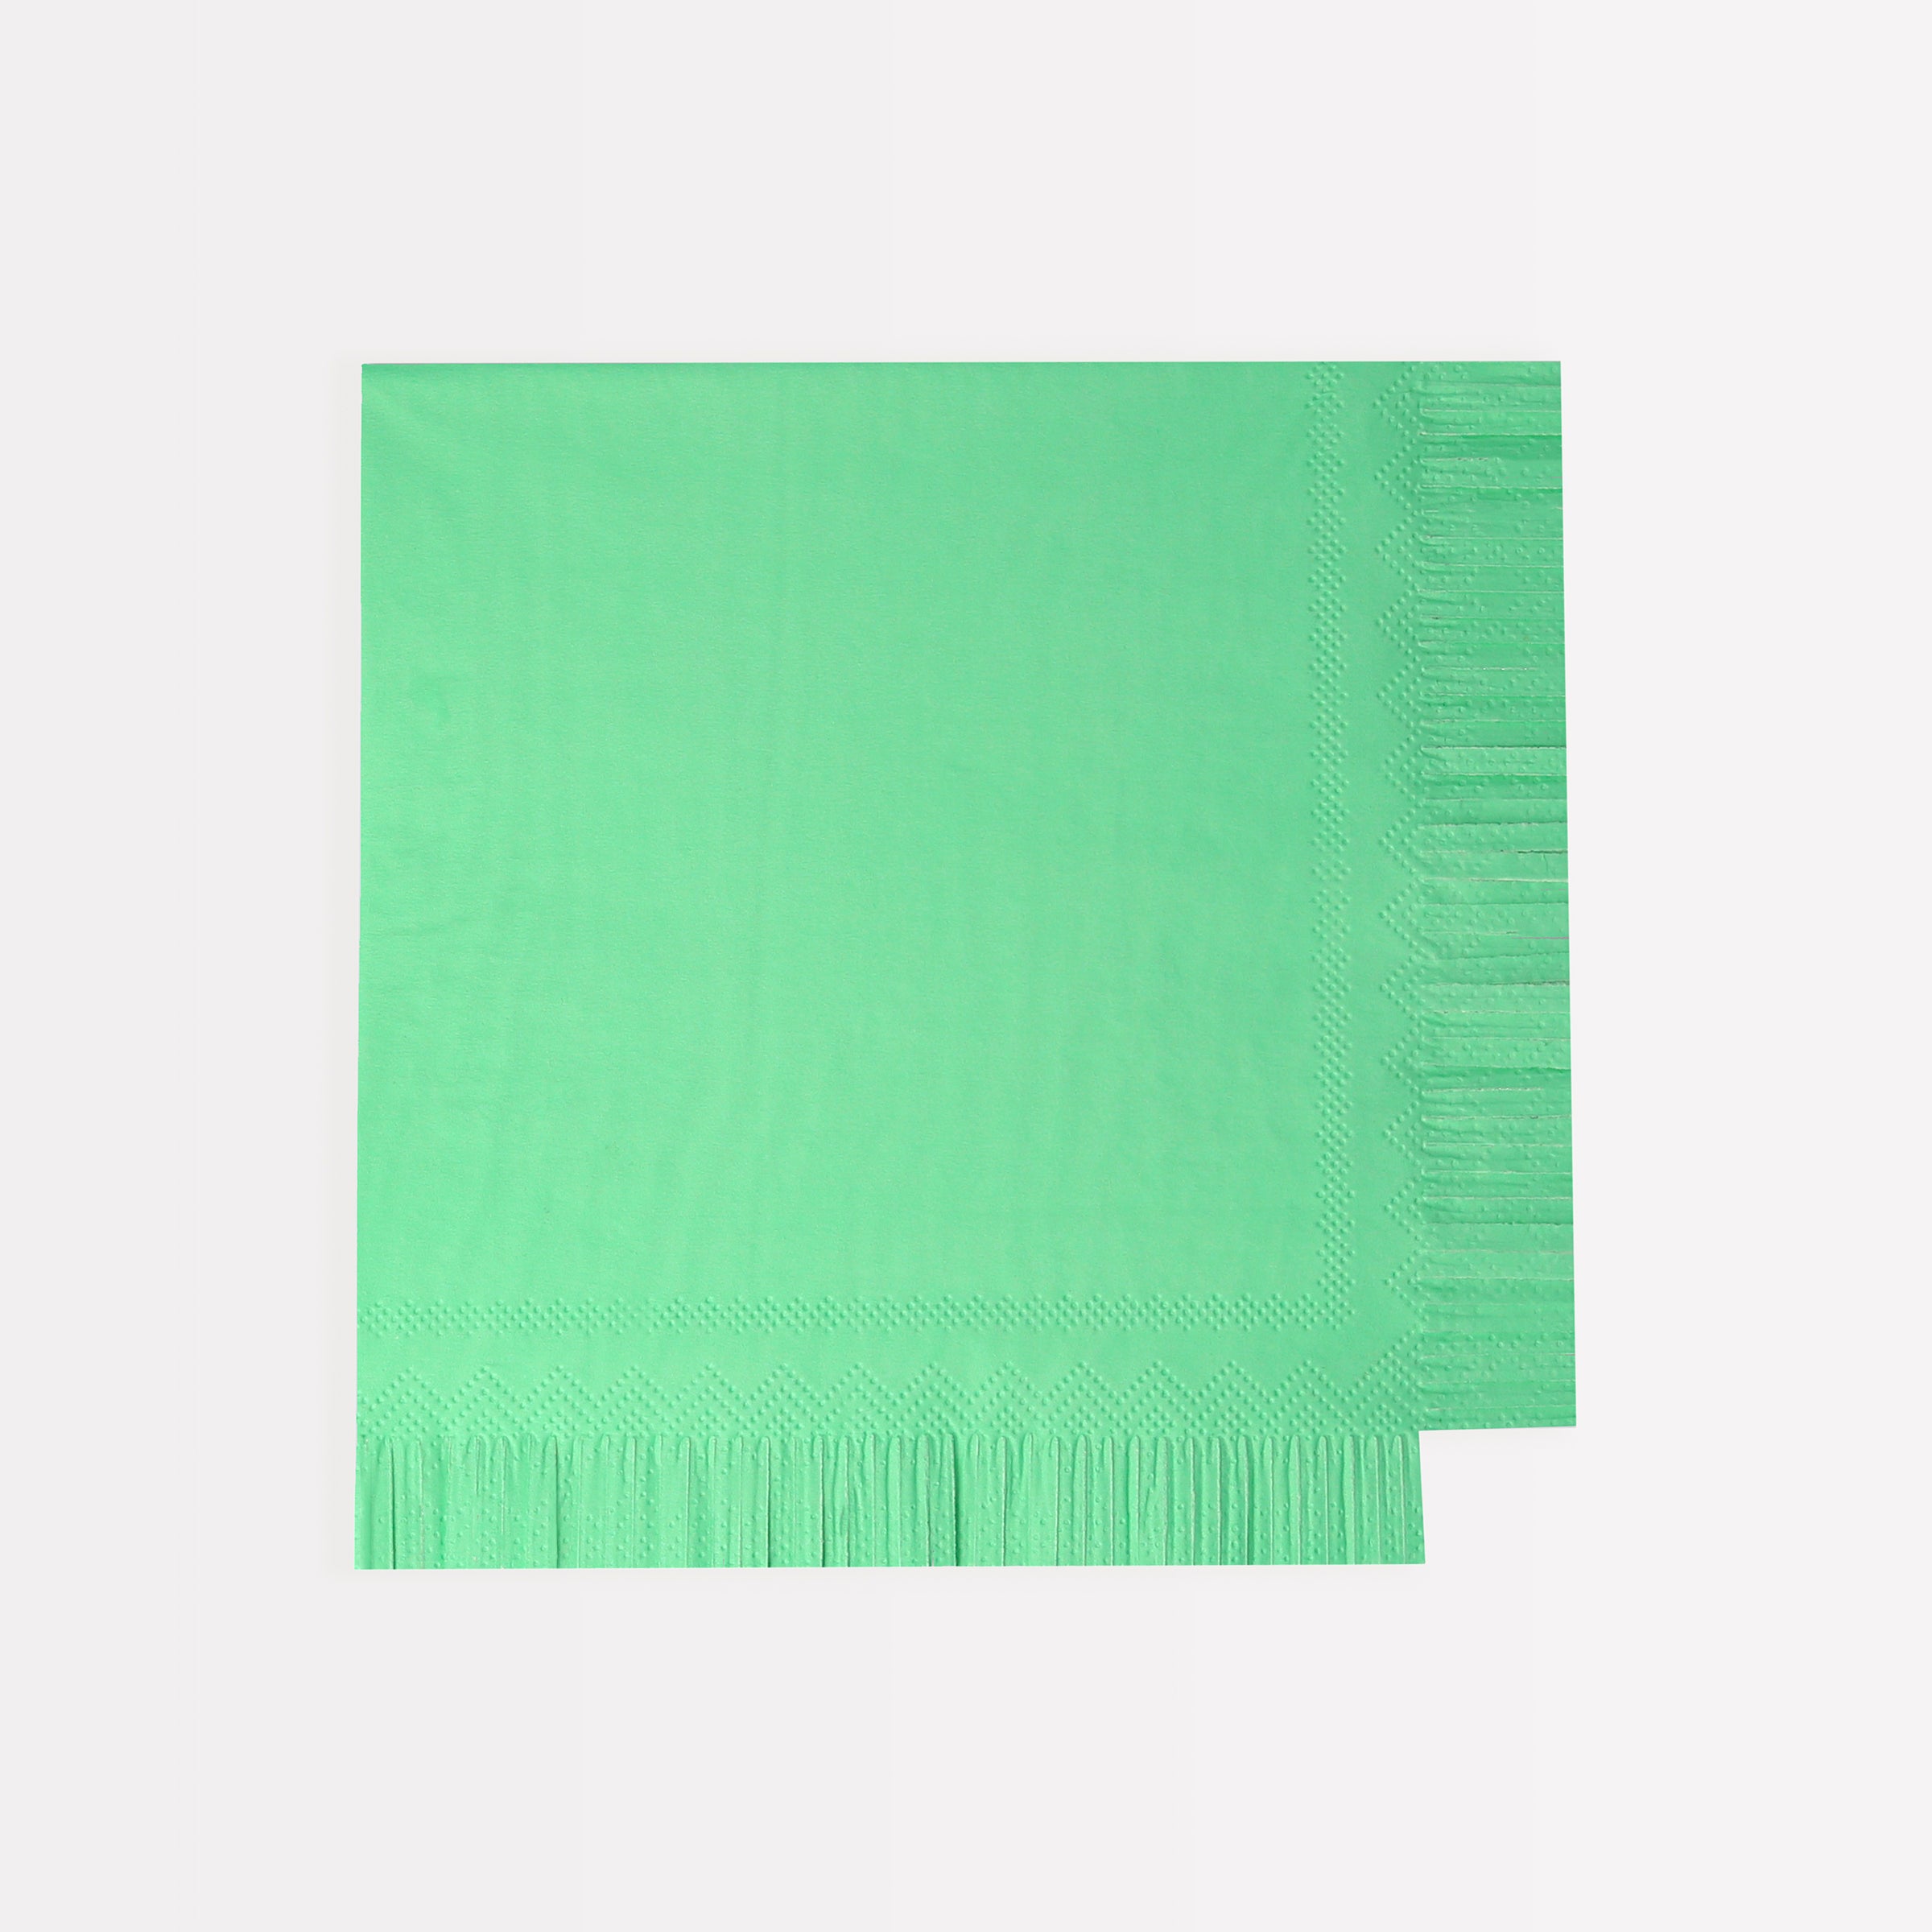 Our party napkins, in bright colors, add a decorative touch to your birthday party table.